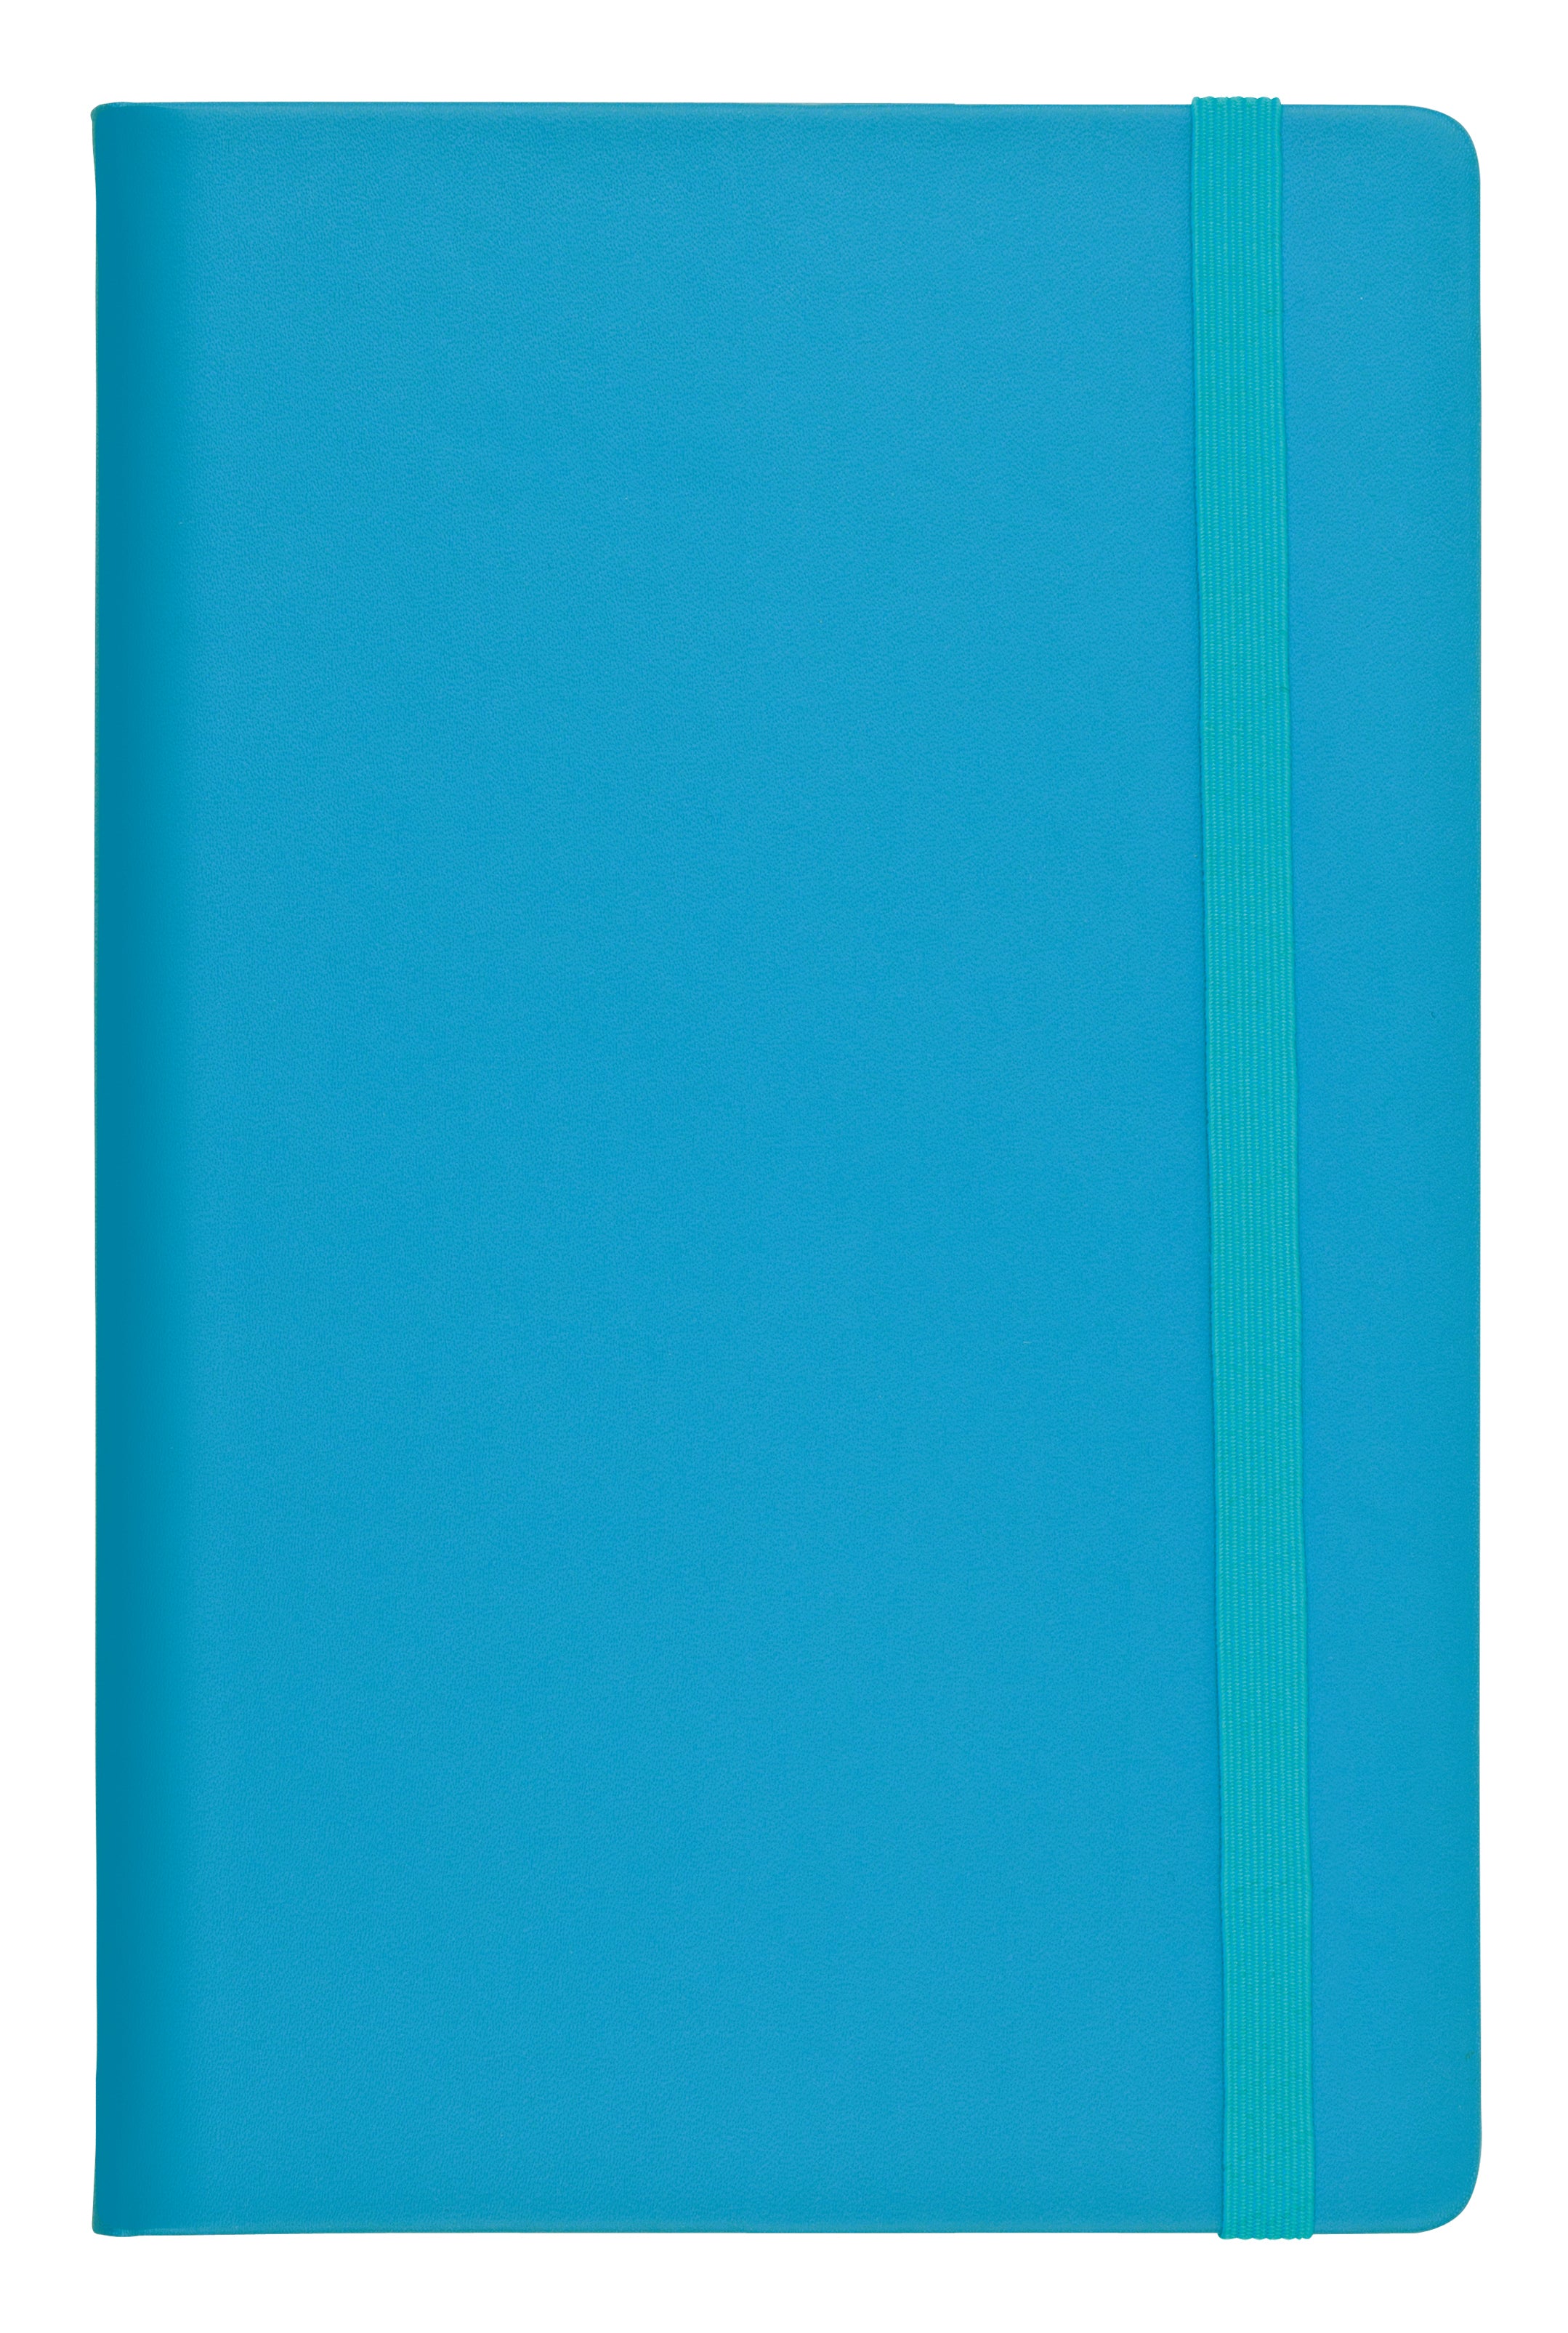 Vauxhall A5 Notebook Ruled Teal